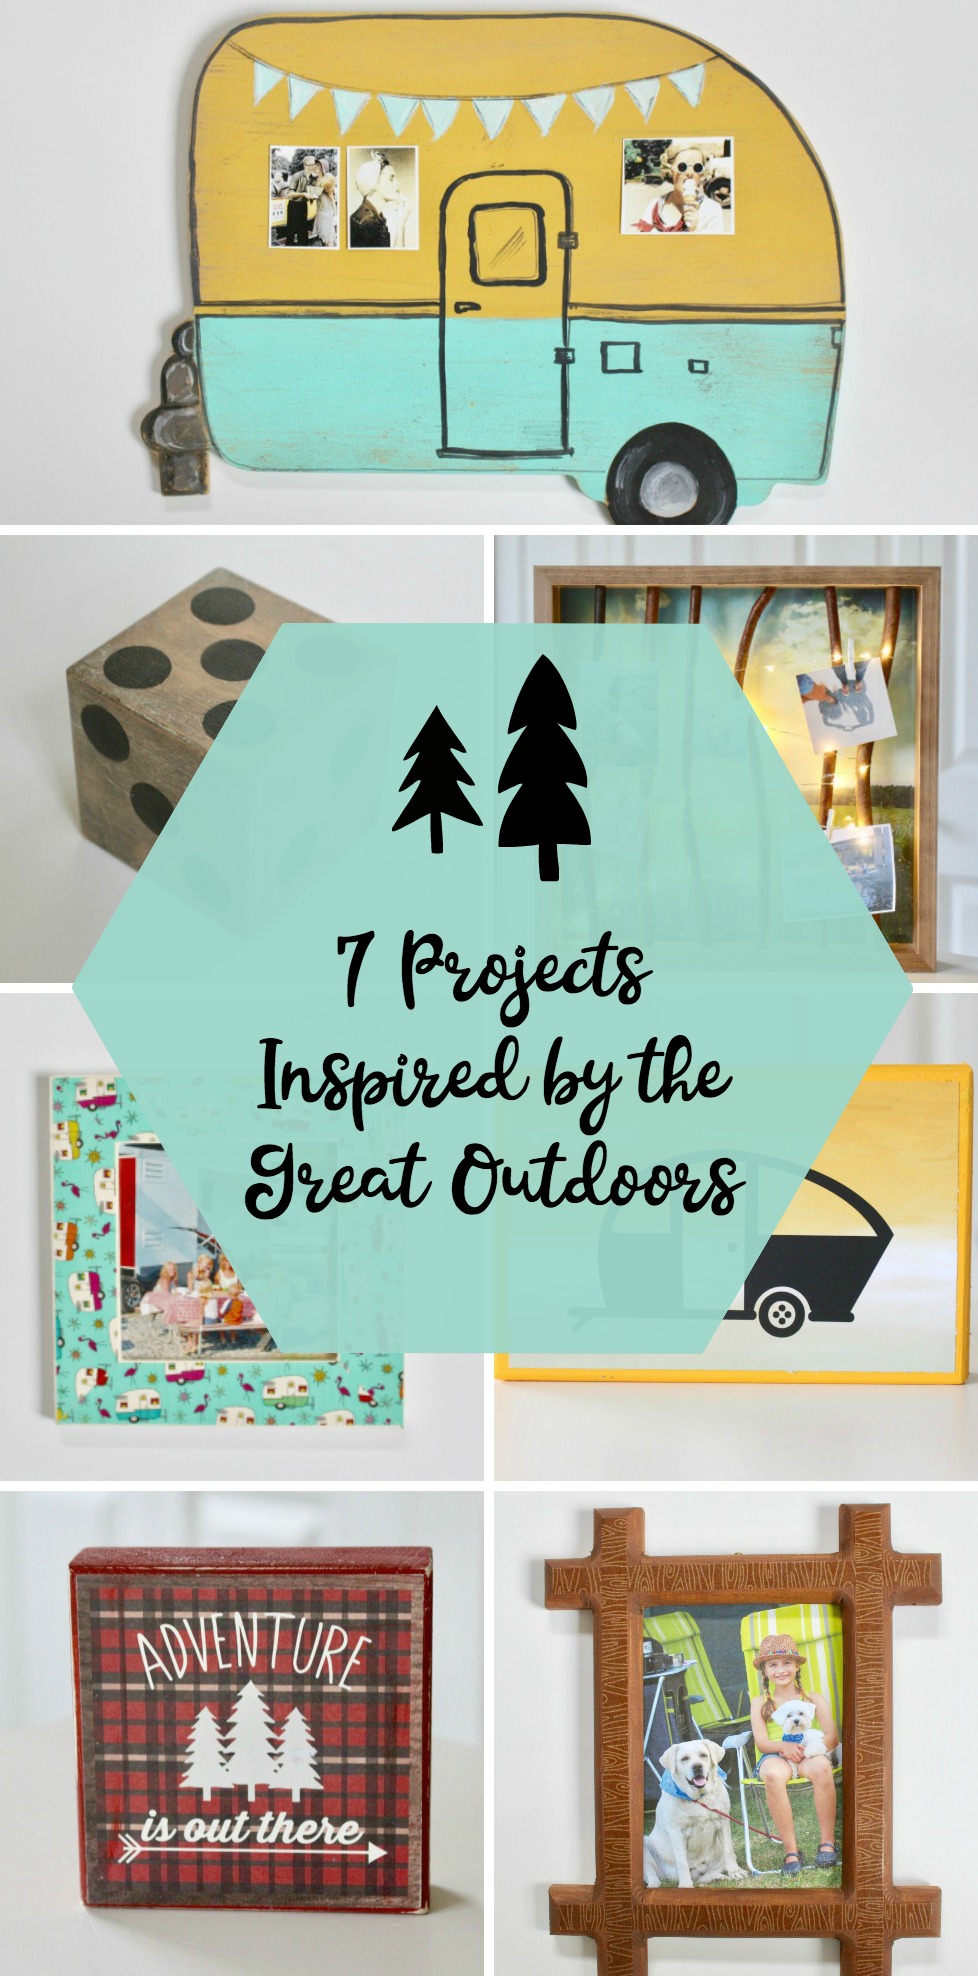 Decor Projects inspired by the Great Outdoors